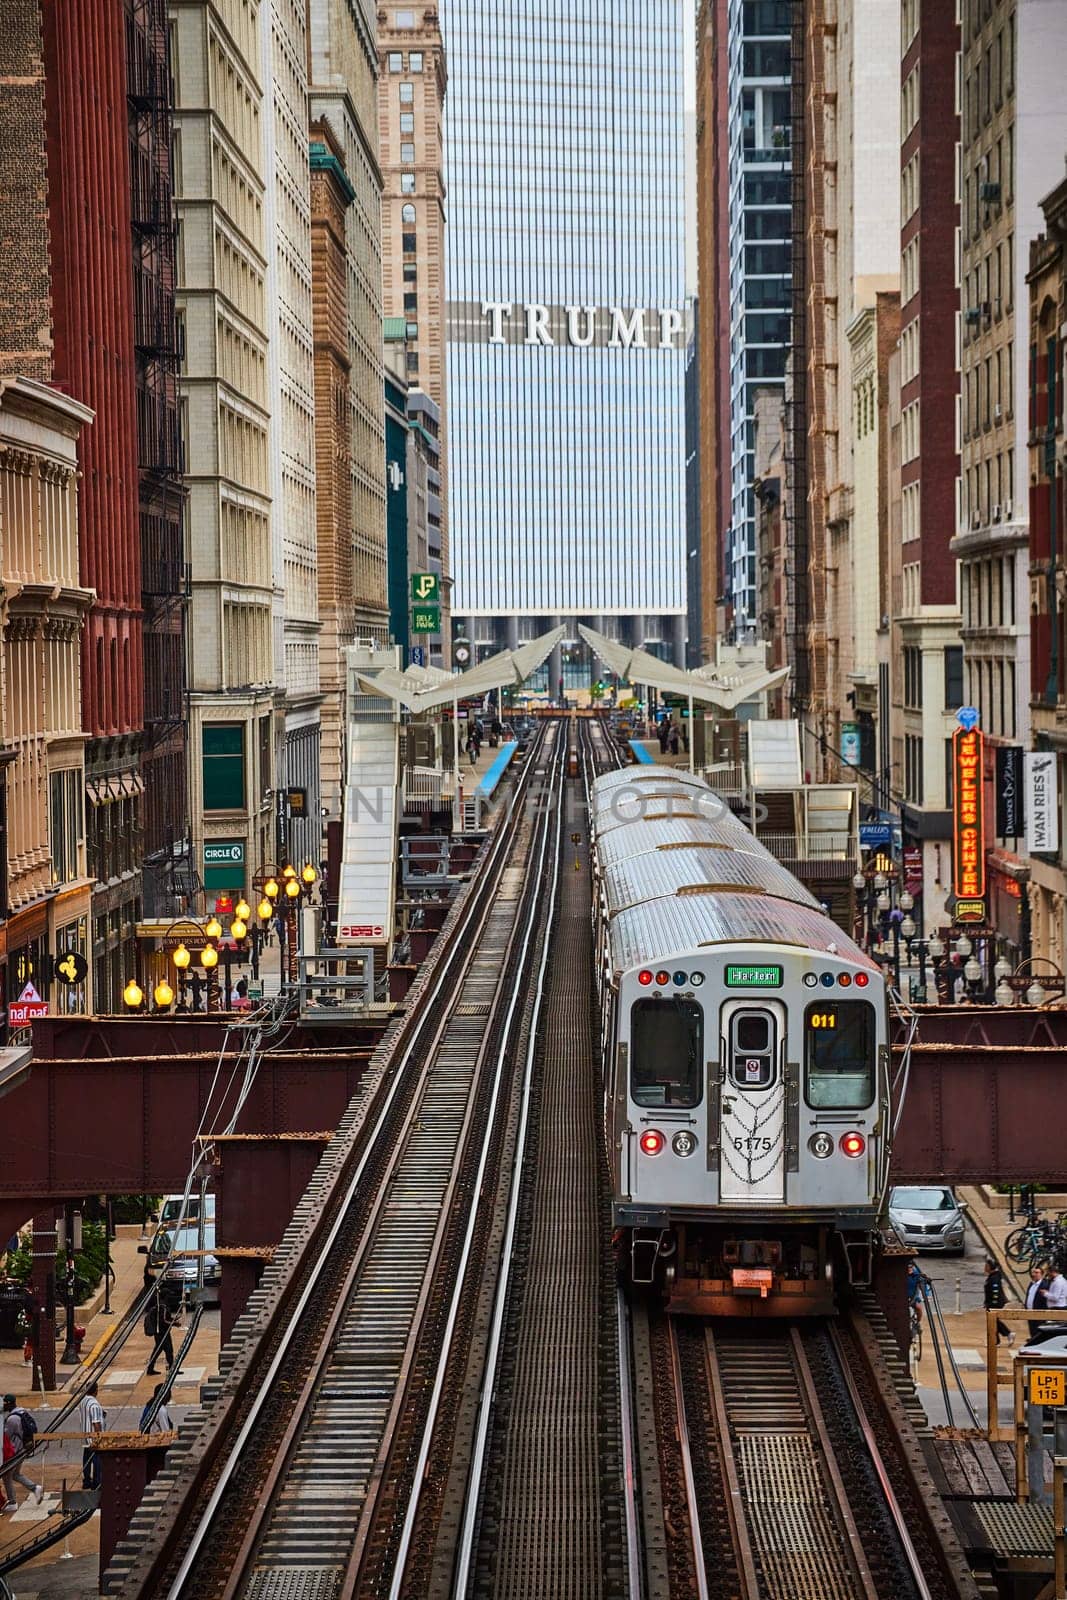 Elevated train in motion amidst Chicago's towering architecture, featuring Trump Tower, in 2023